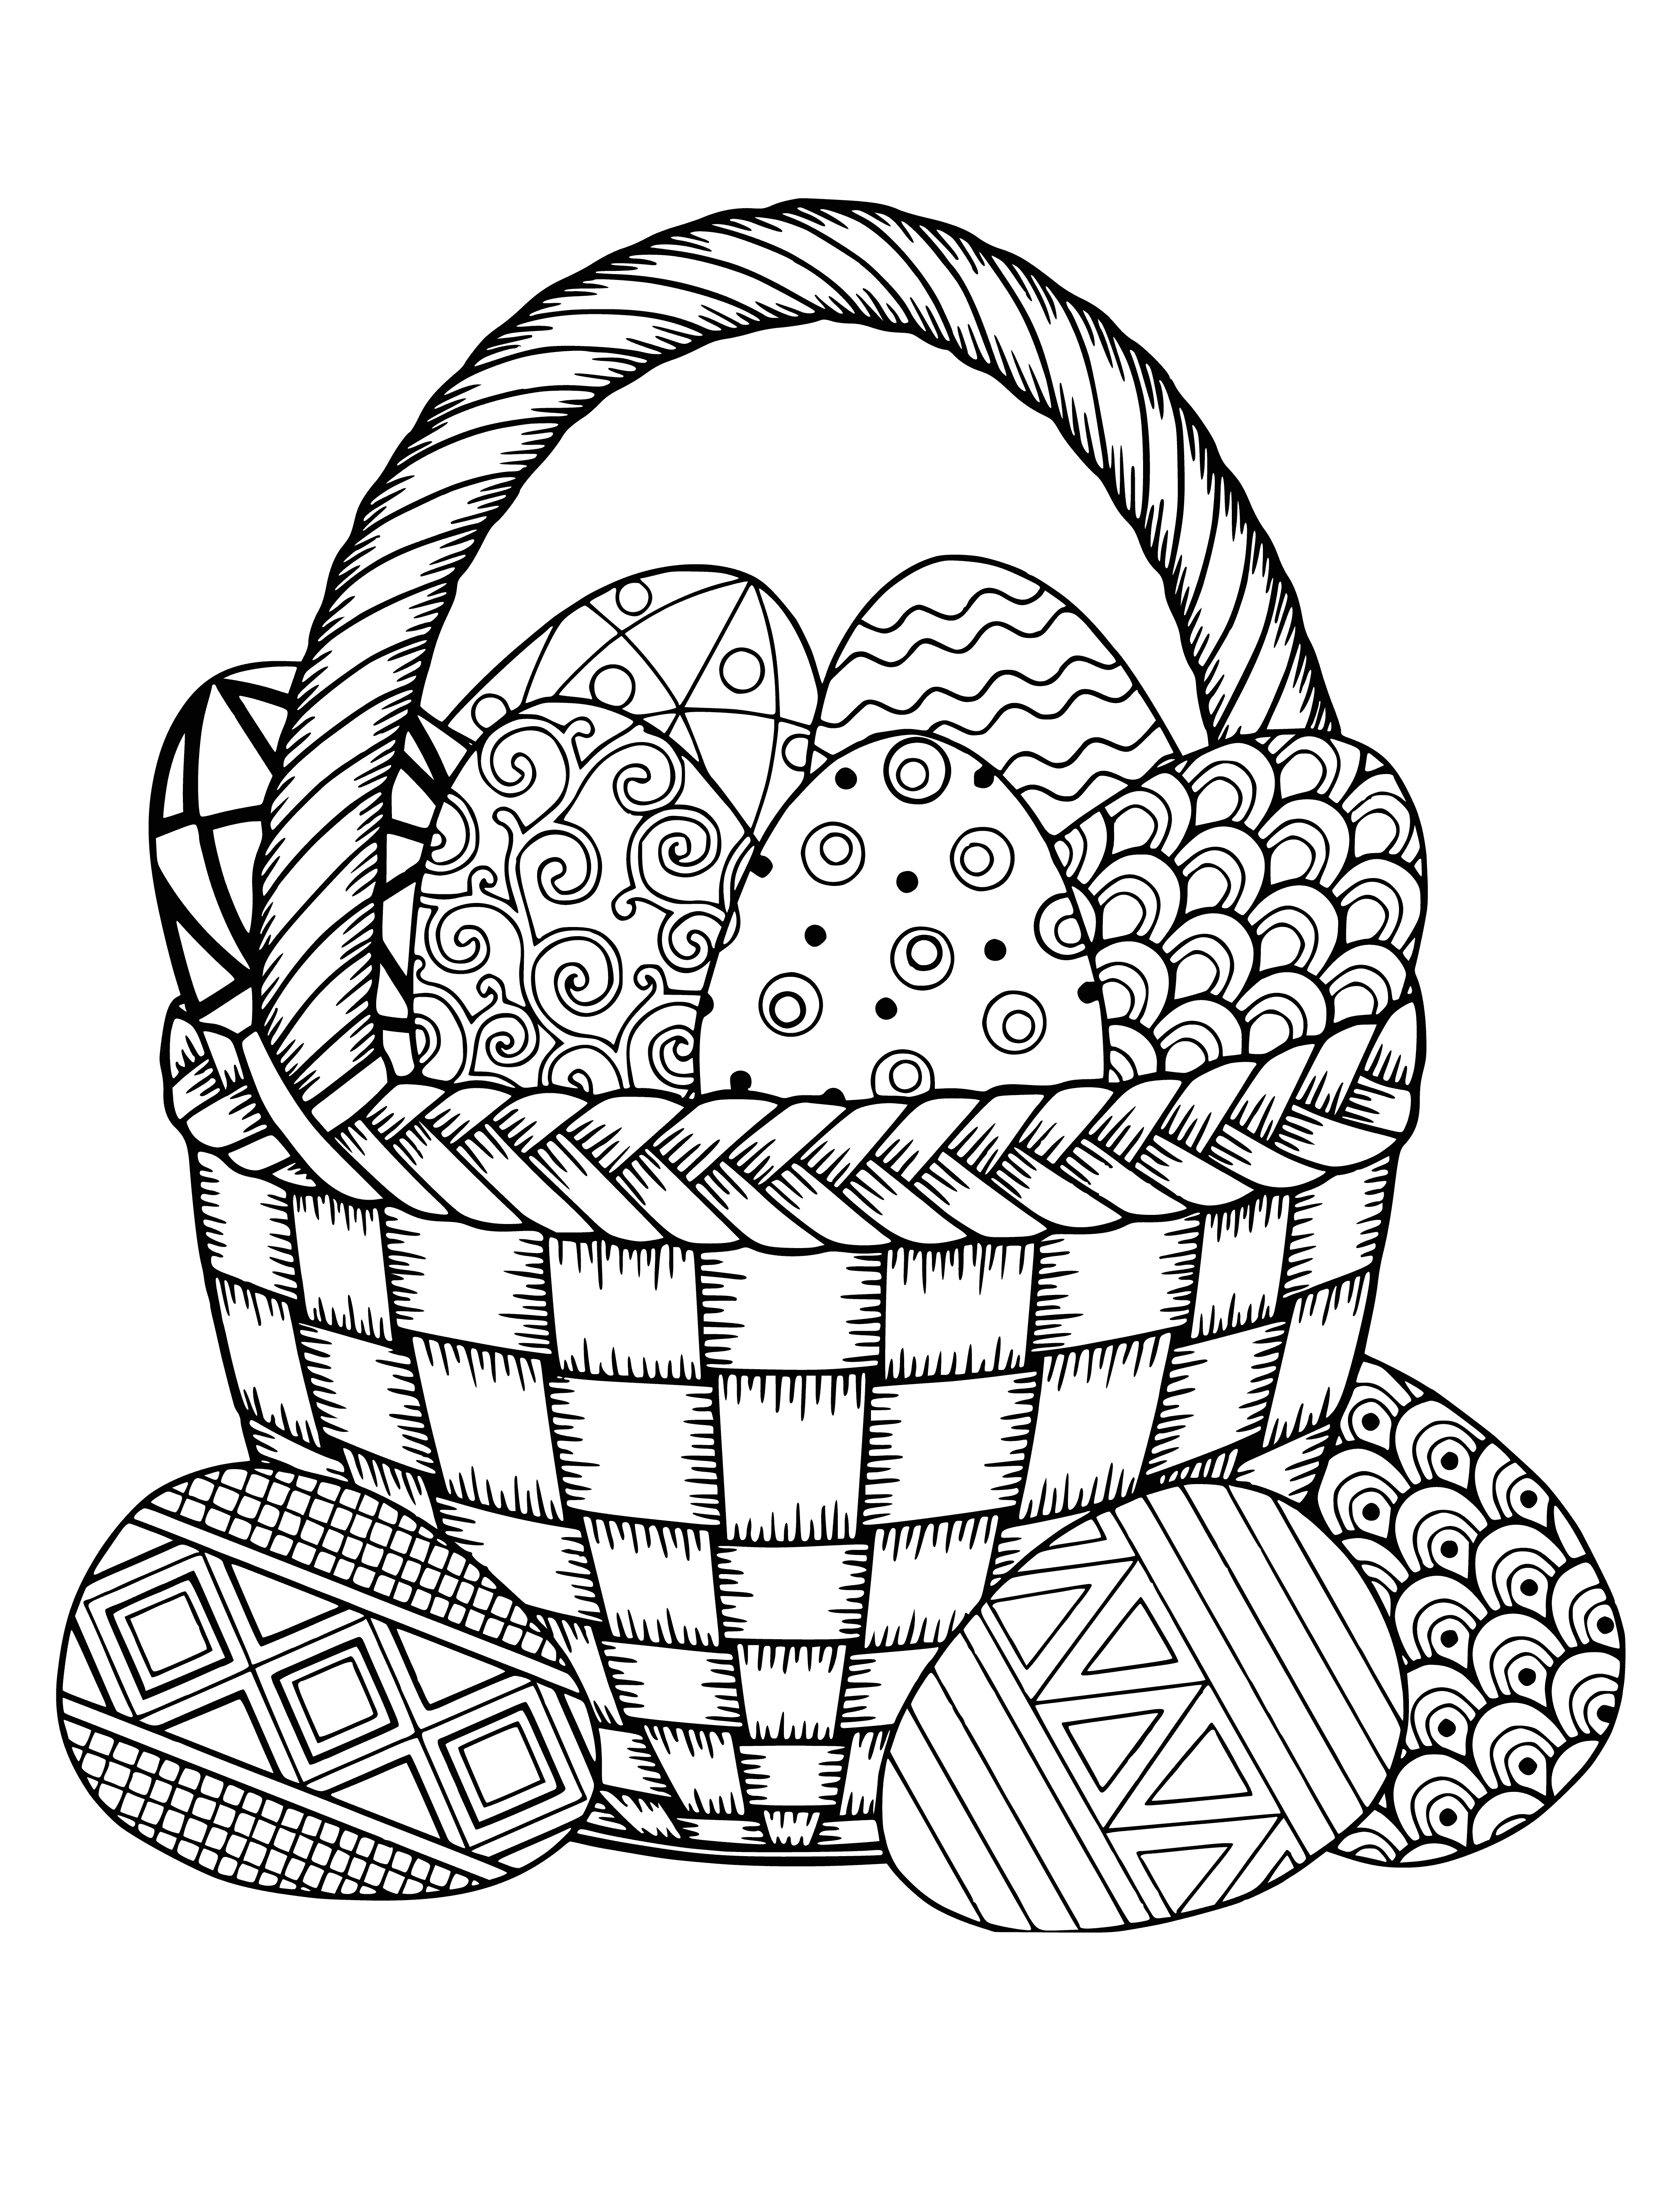 coloring page: => Basket of Easter eggs: multi-colored & decorated, plus a bunny holding an egg.